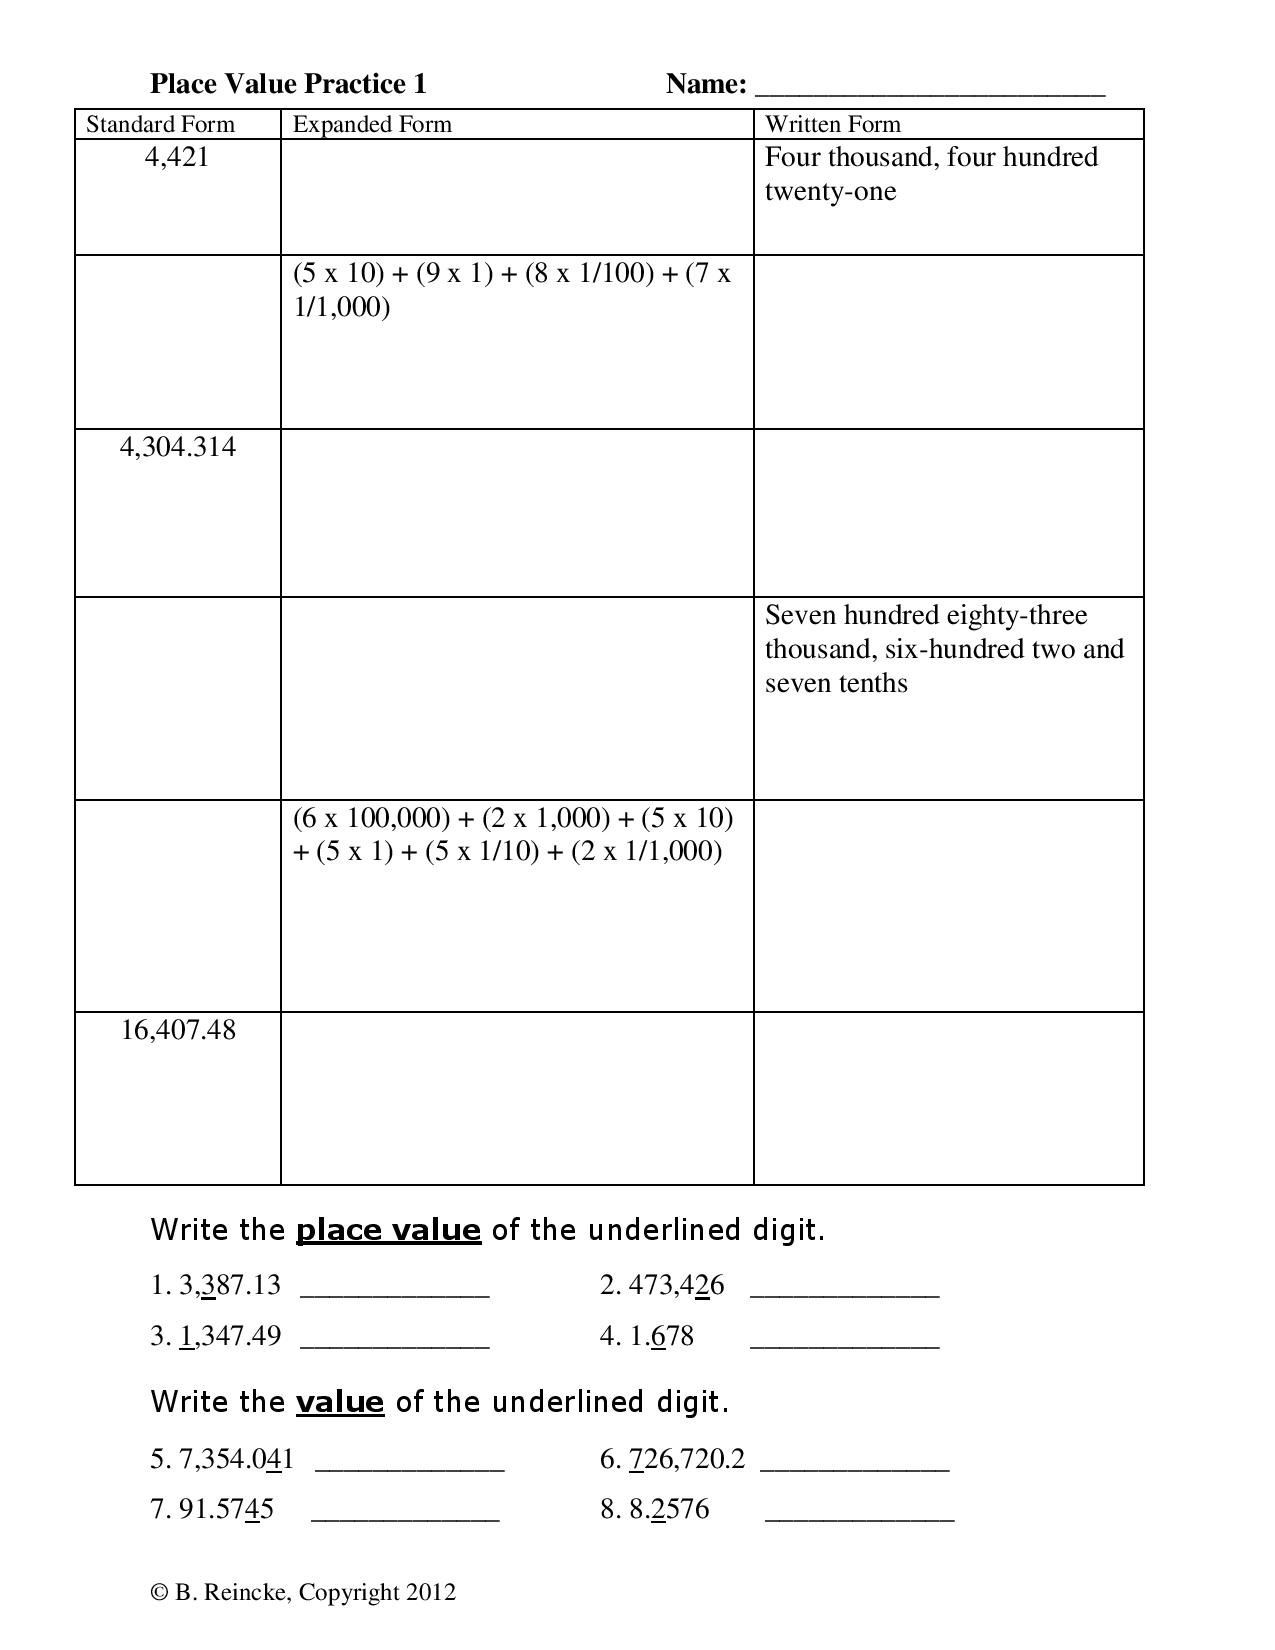 Word form Worksheets 4th Grade This Pdf Document Contains Six Place Value Worksheets